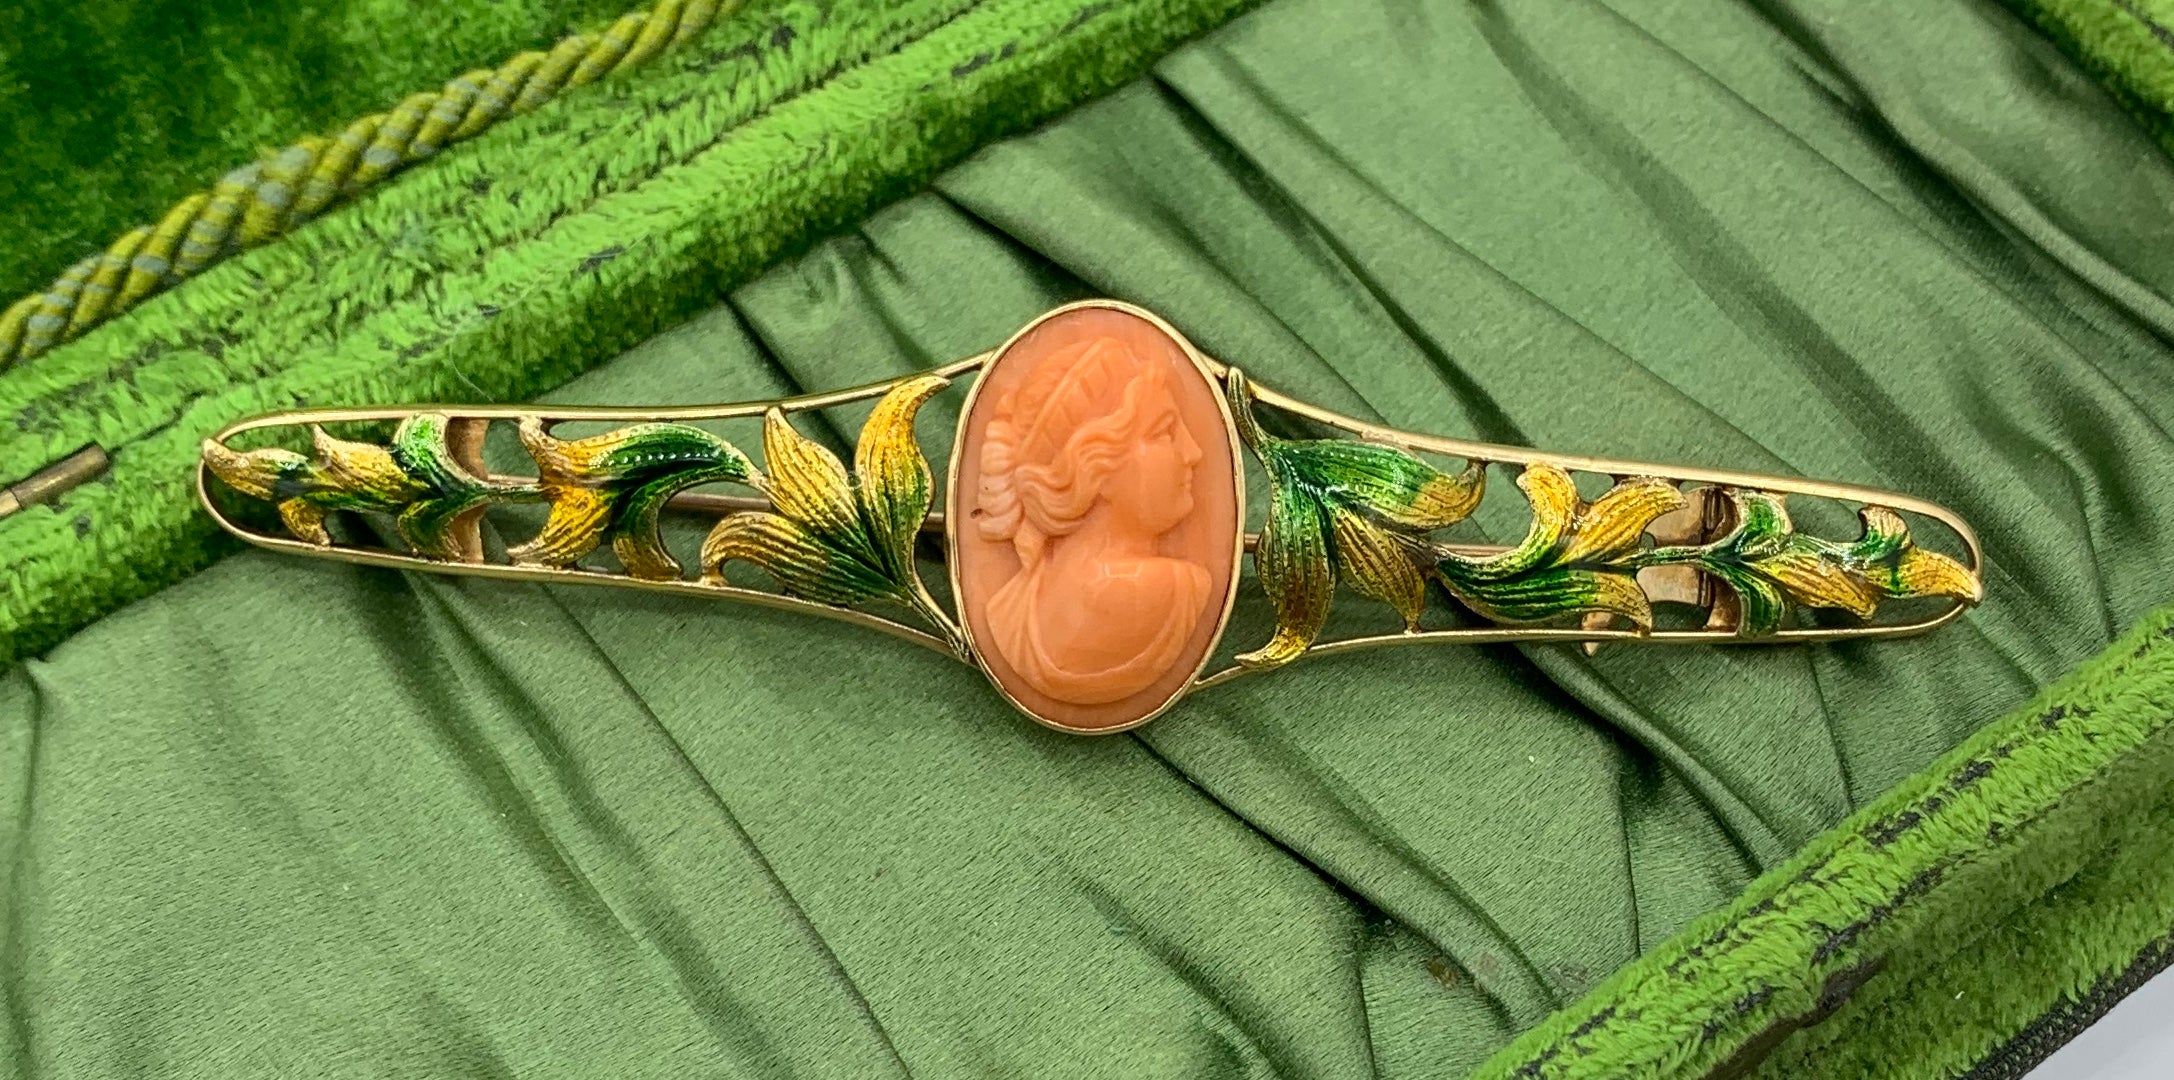 This is an absolutely stunning antique Art Nouveau - Belle Epoque Coral Cameo Brooch Bar Pin with Enamel Flower and Leaf Design in 14 Karat Gold in a monumental four inch length.  The Coral Cameo is exquisite with a high relief carving of a